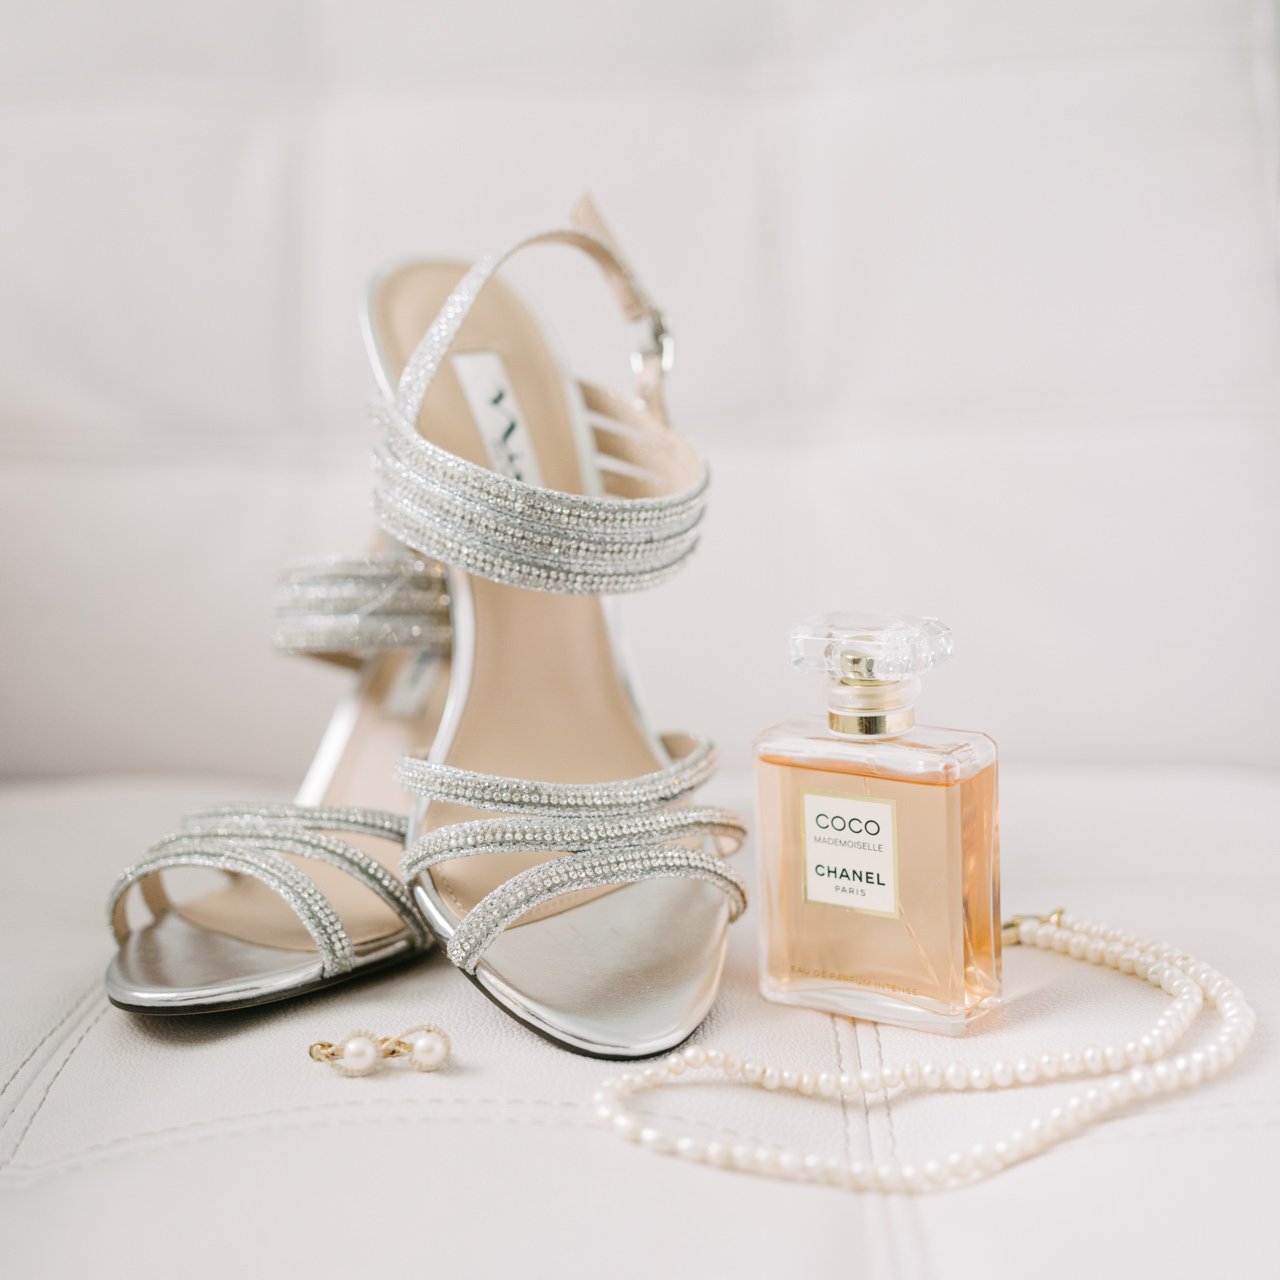  Detail photo of bride shoes, necklace, coco Chanel perfume and earrings on white chair 